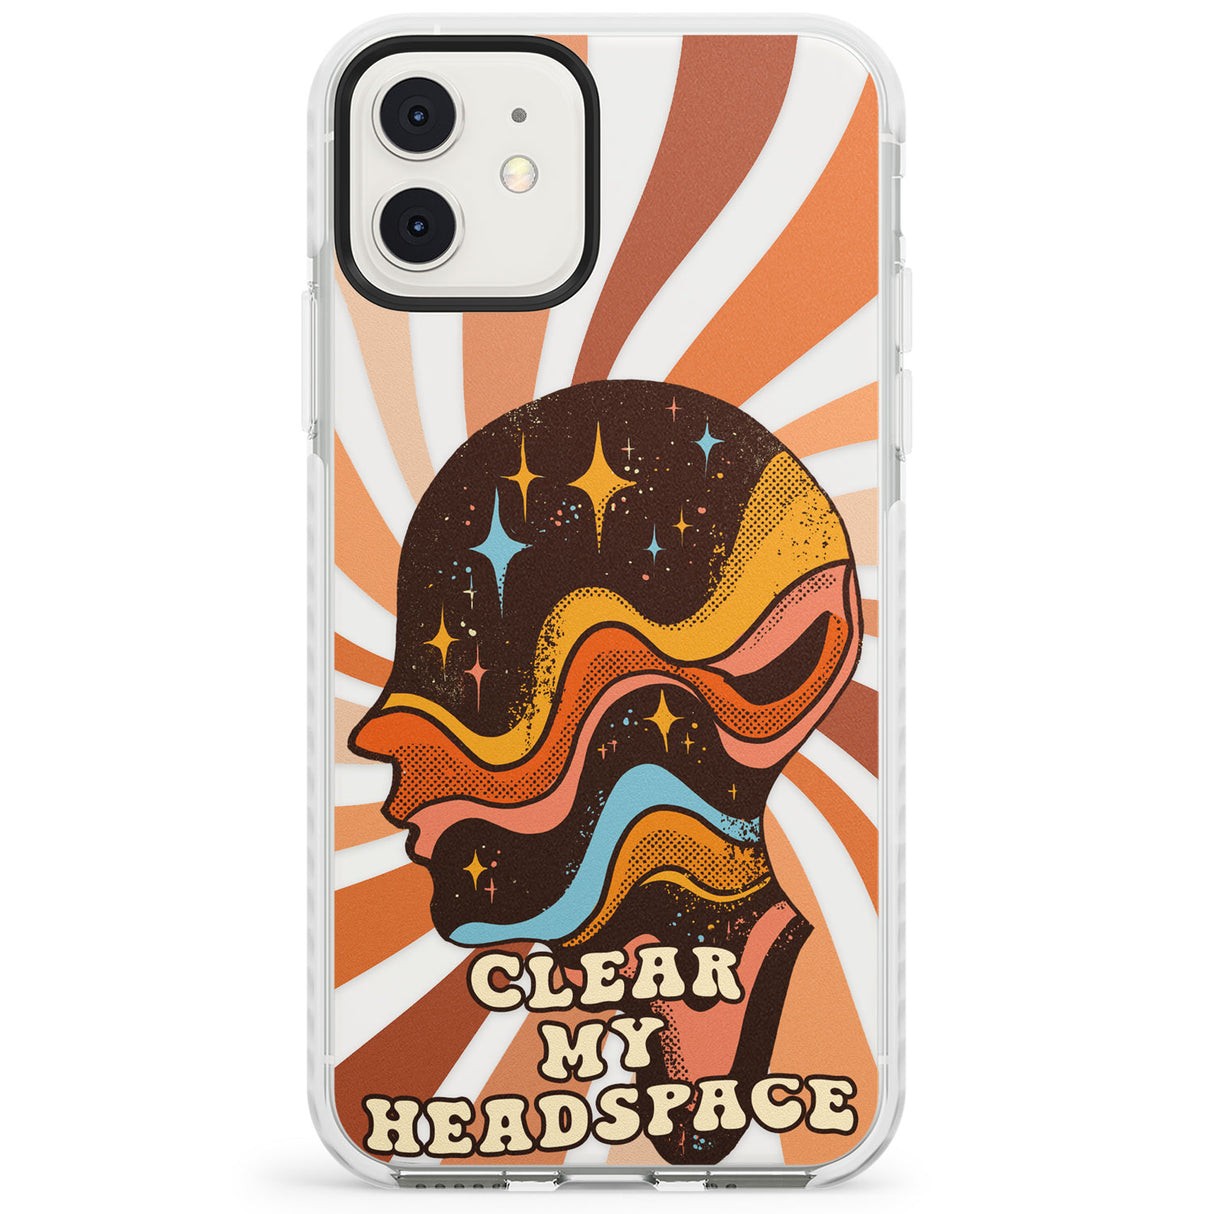 Clear My Headspace Impact Phone Case for iPhone 11, iphone 12